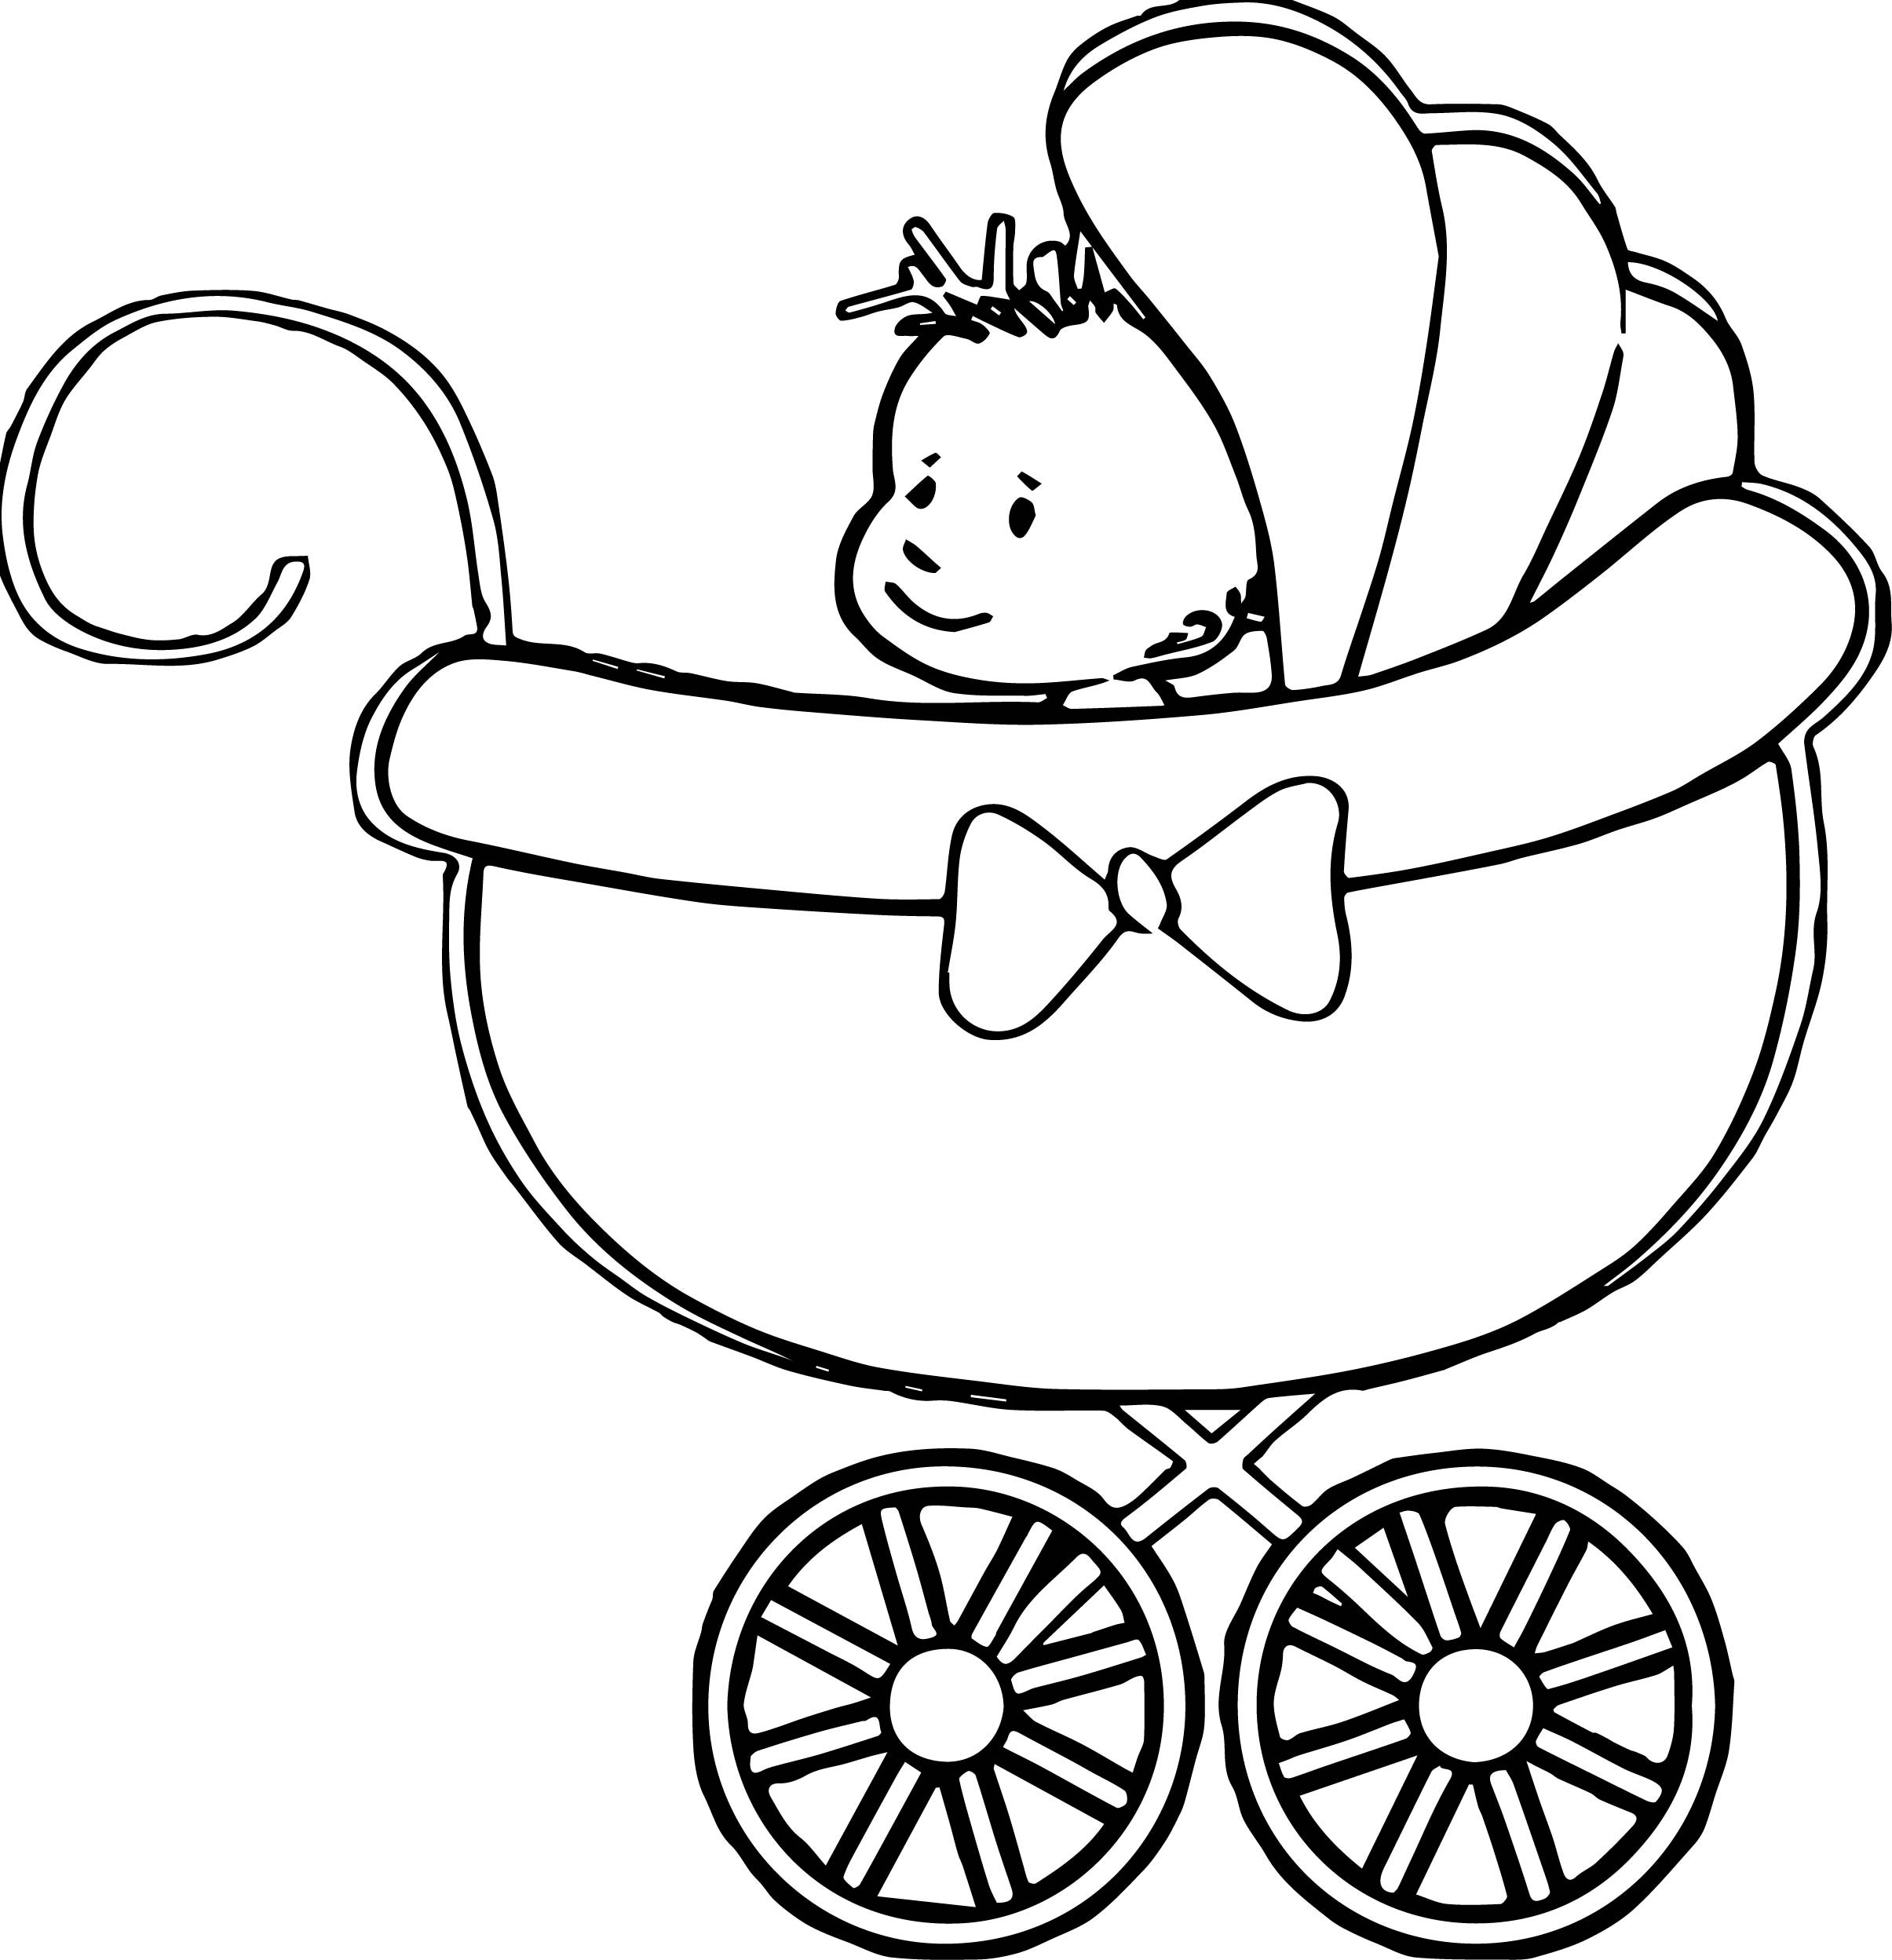 Baby Shower Coloring Page
 The Stroller Baby Boy Coloring Page